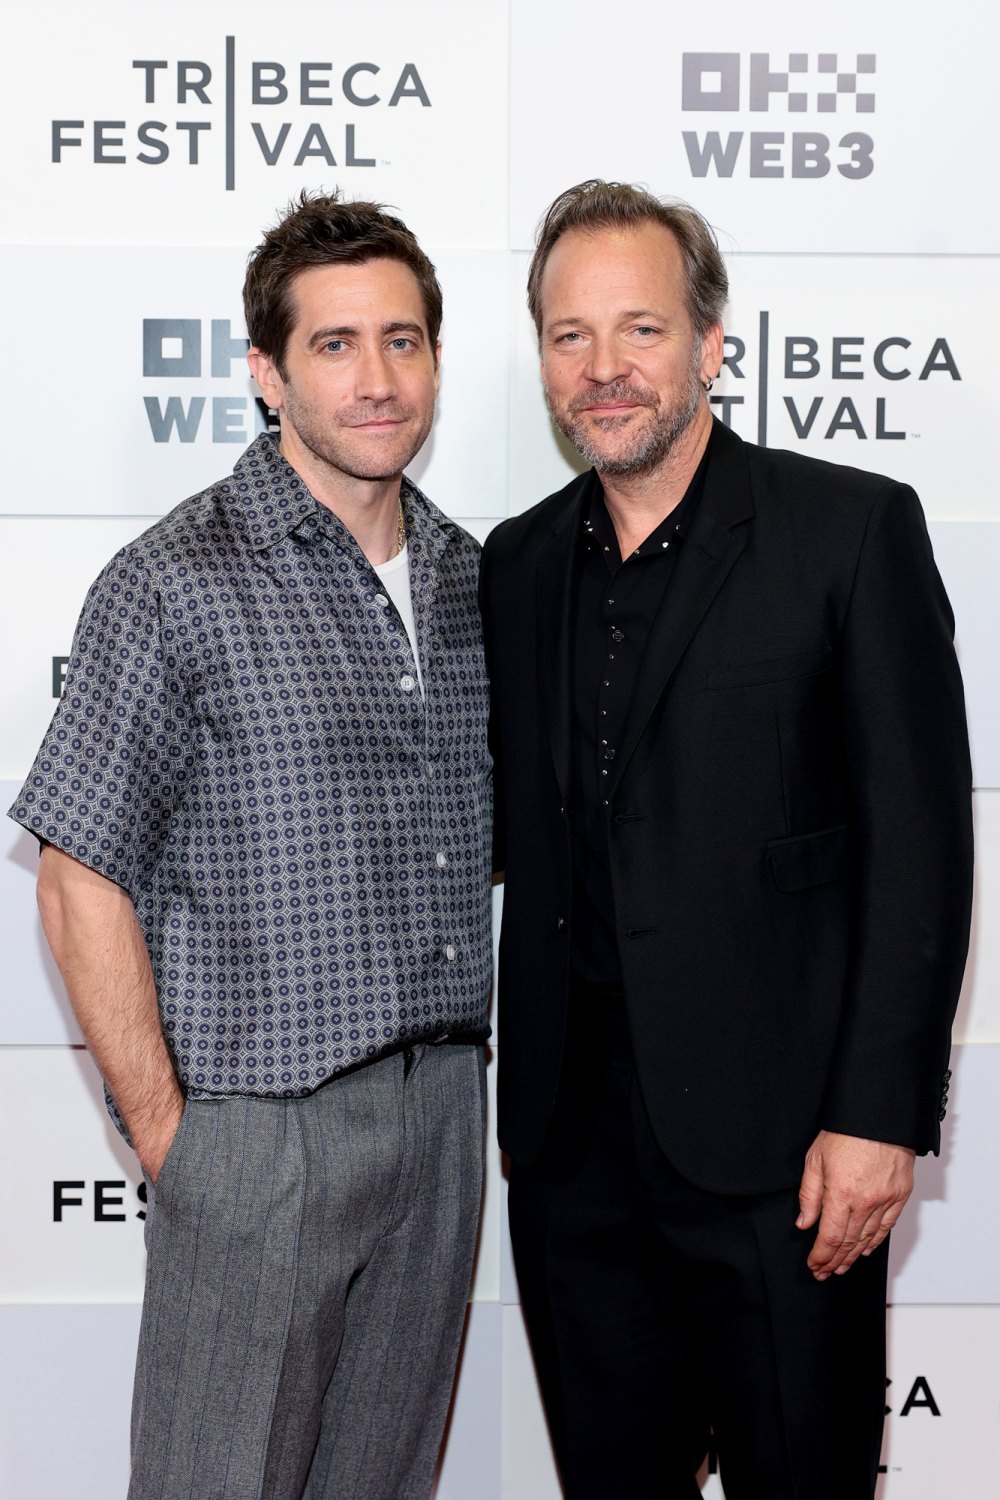 Jake Gyllenhaal Thought Working With Peter Sarsgaard Was a Long Shot